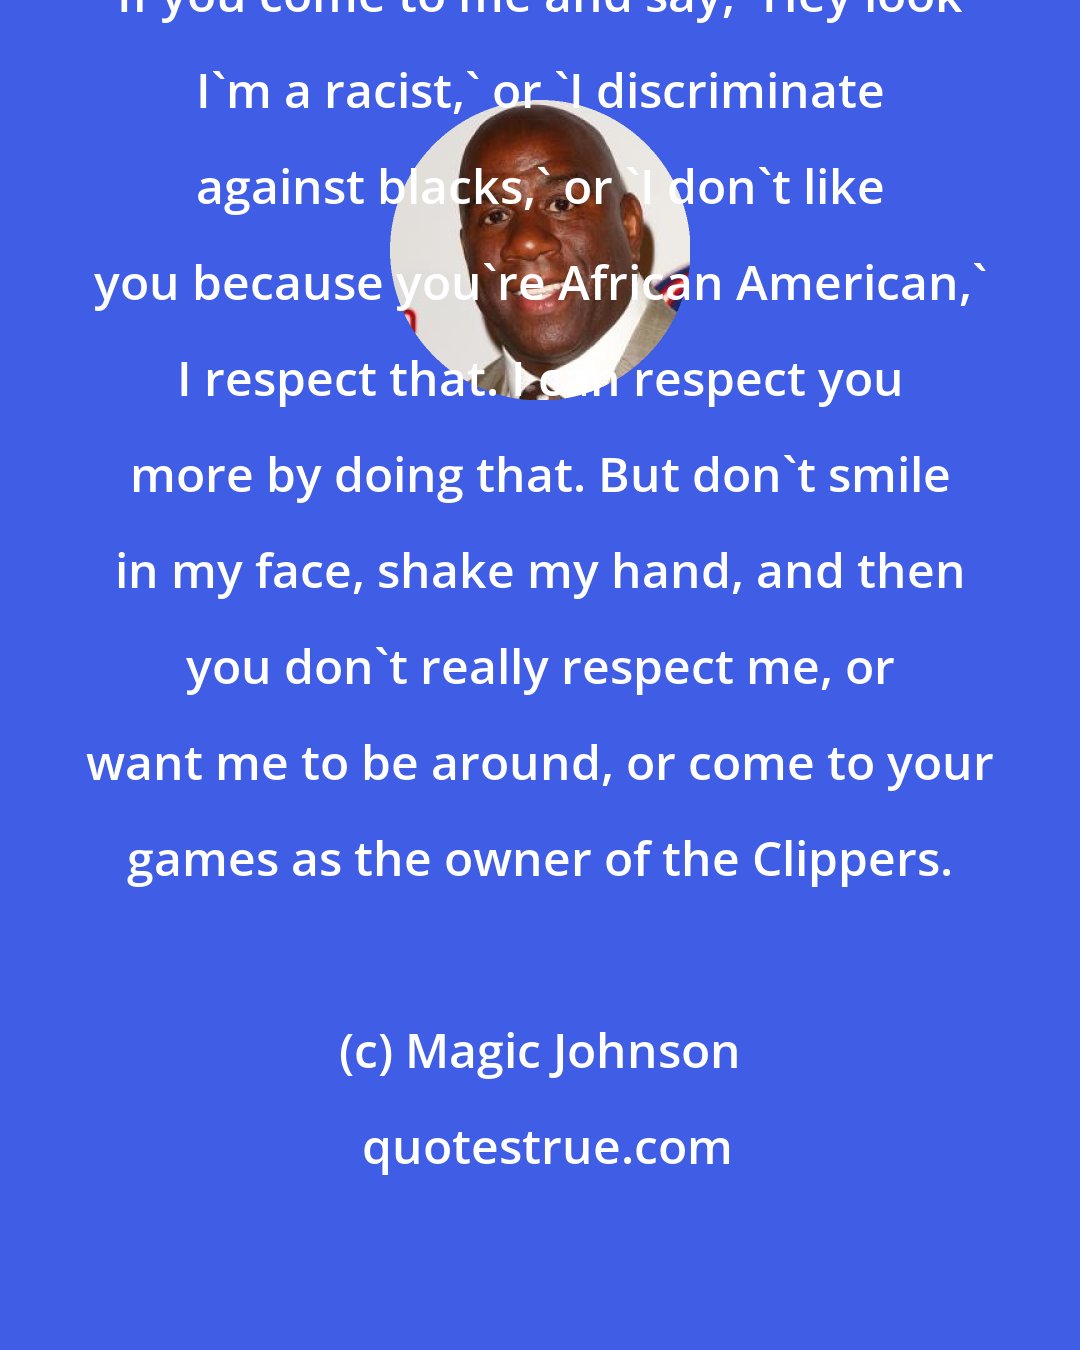 Magic Johnson: If you come to me and say, 'Hey look I'm a racist,' or 'I discriminate against blacks,' or 'I don't like you because you're African American,' I respect that. I can respect you more by doing that. But don't smile in my face, shake my hand, and then you don't really respect me, or want me to be around, or come to your games as the owner of the Clippers.